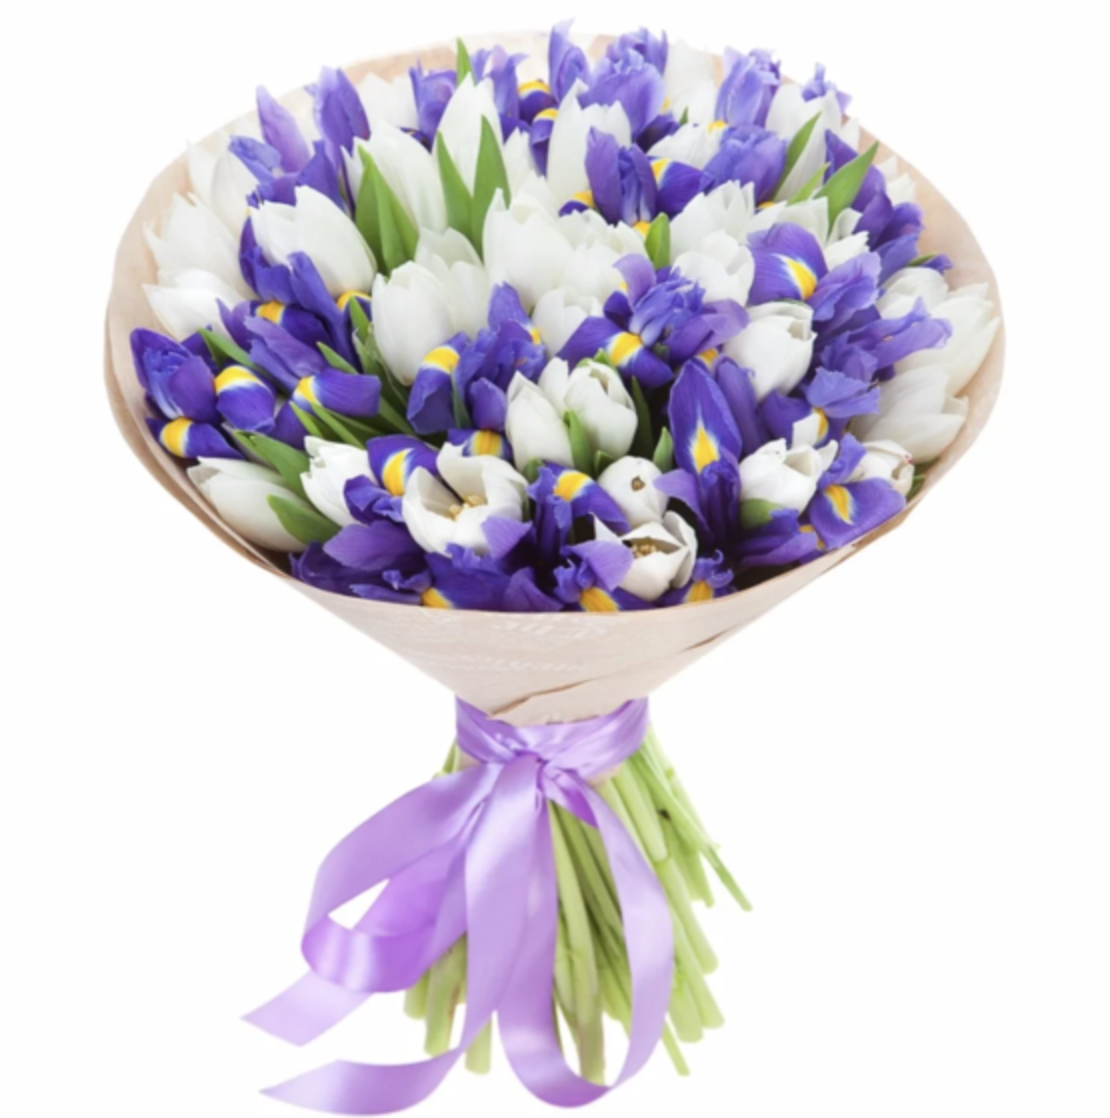 A bouquet of irises and a white tulip